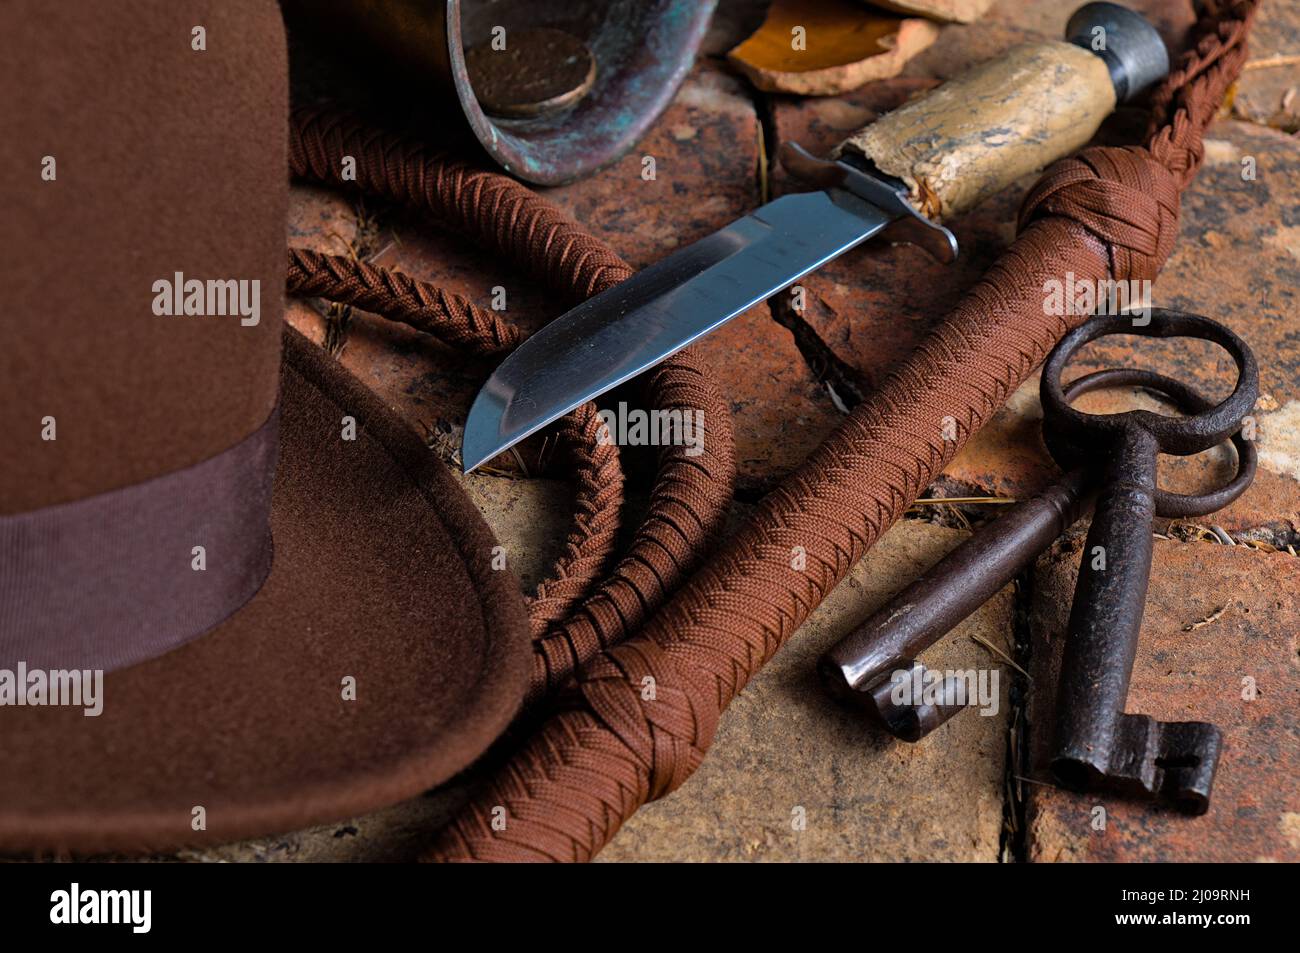 Adventurer themed scene with objects inspired on Indiana Jones Films Stock Photo